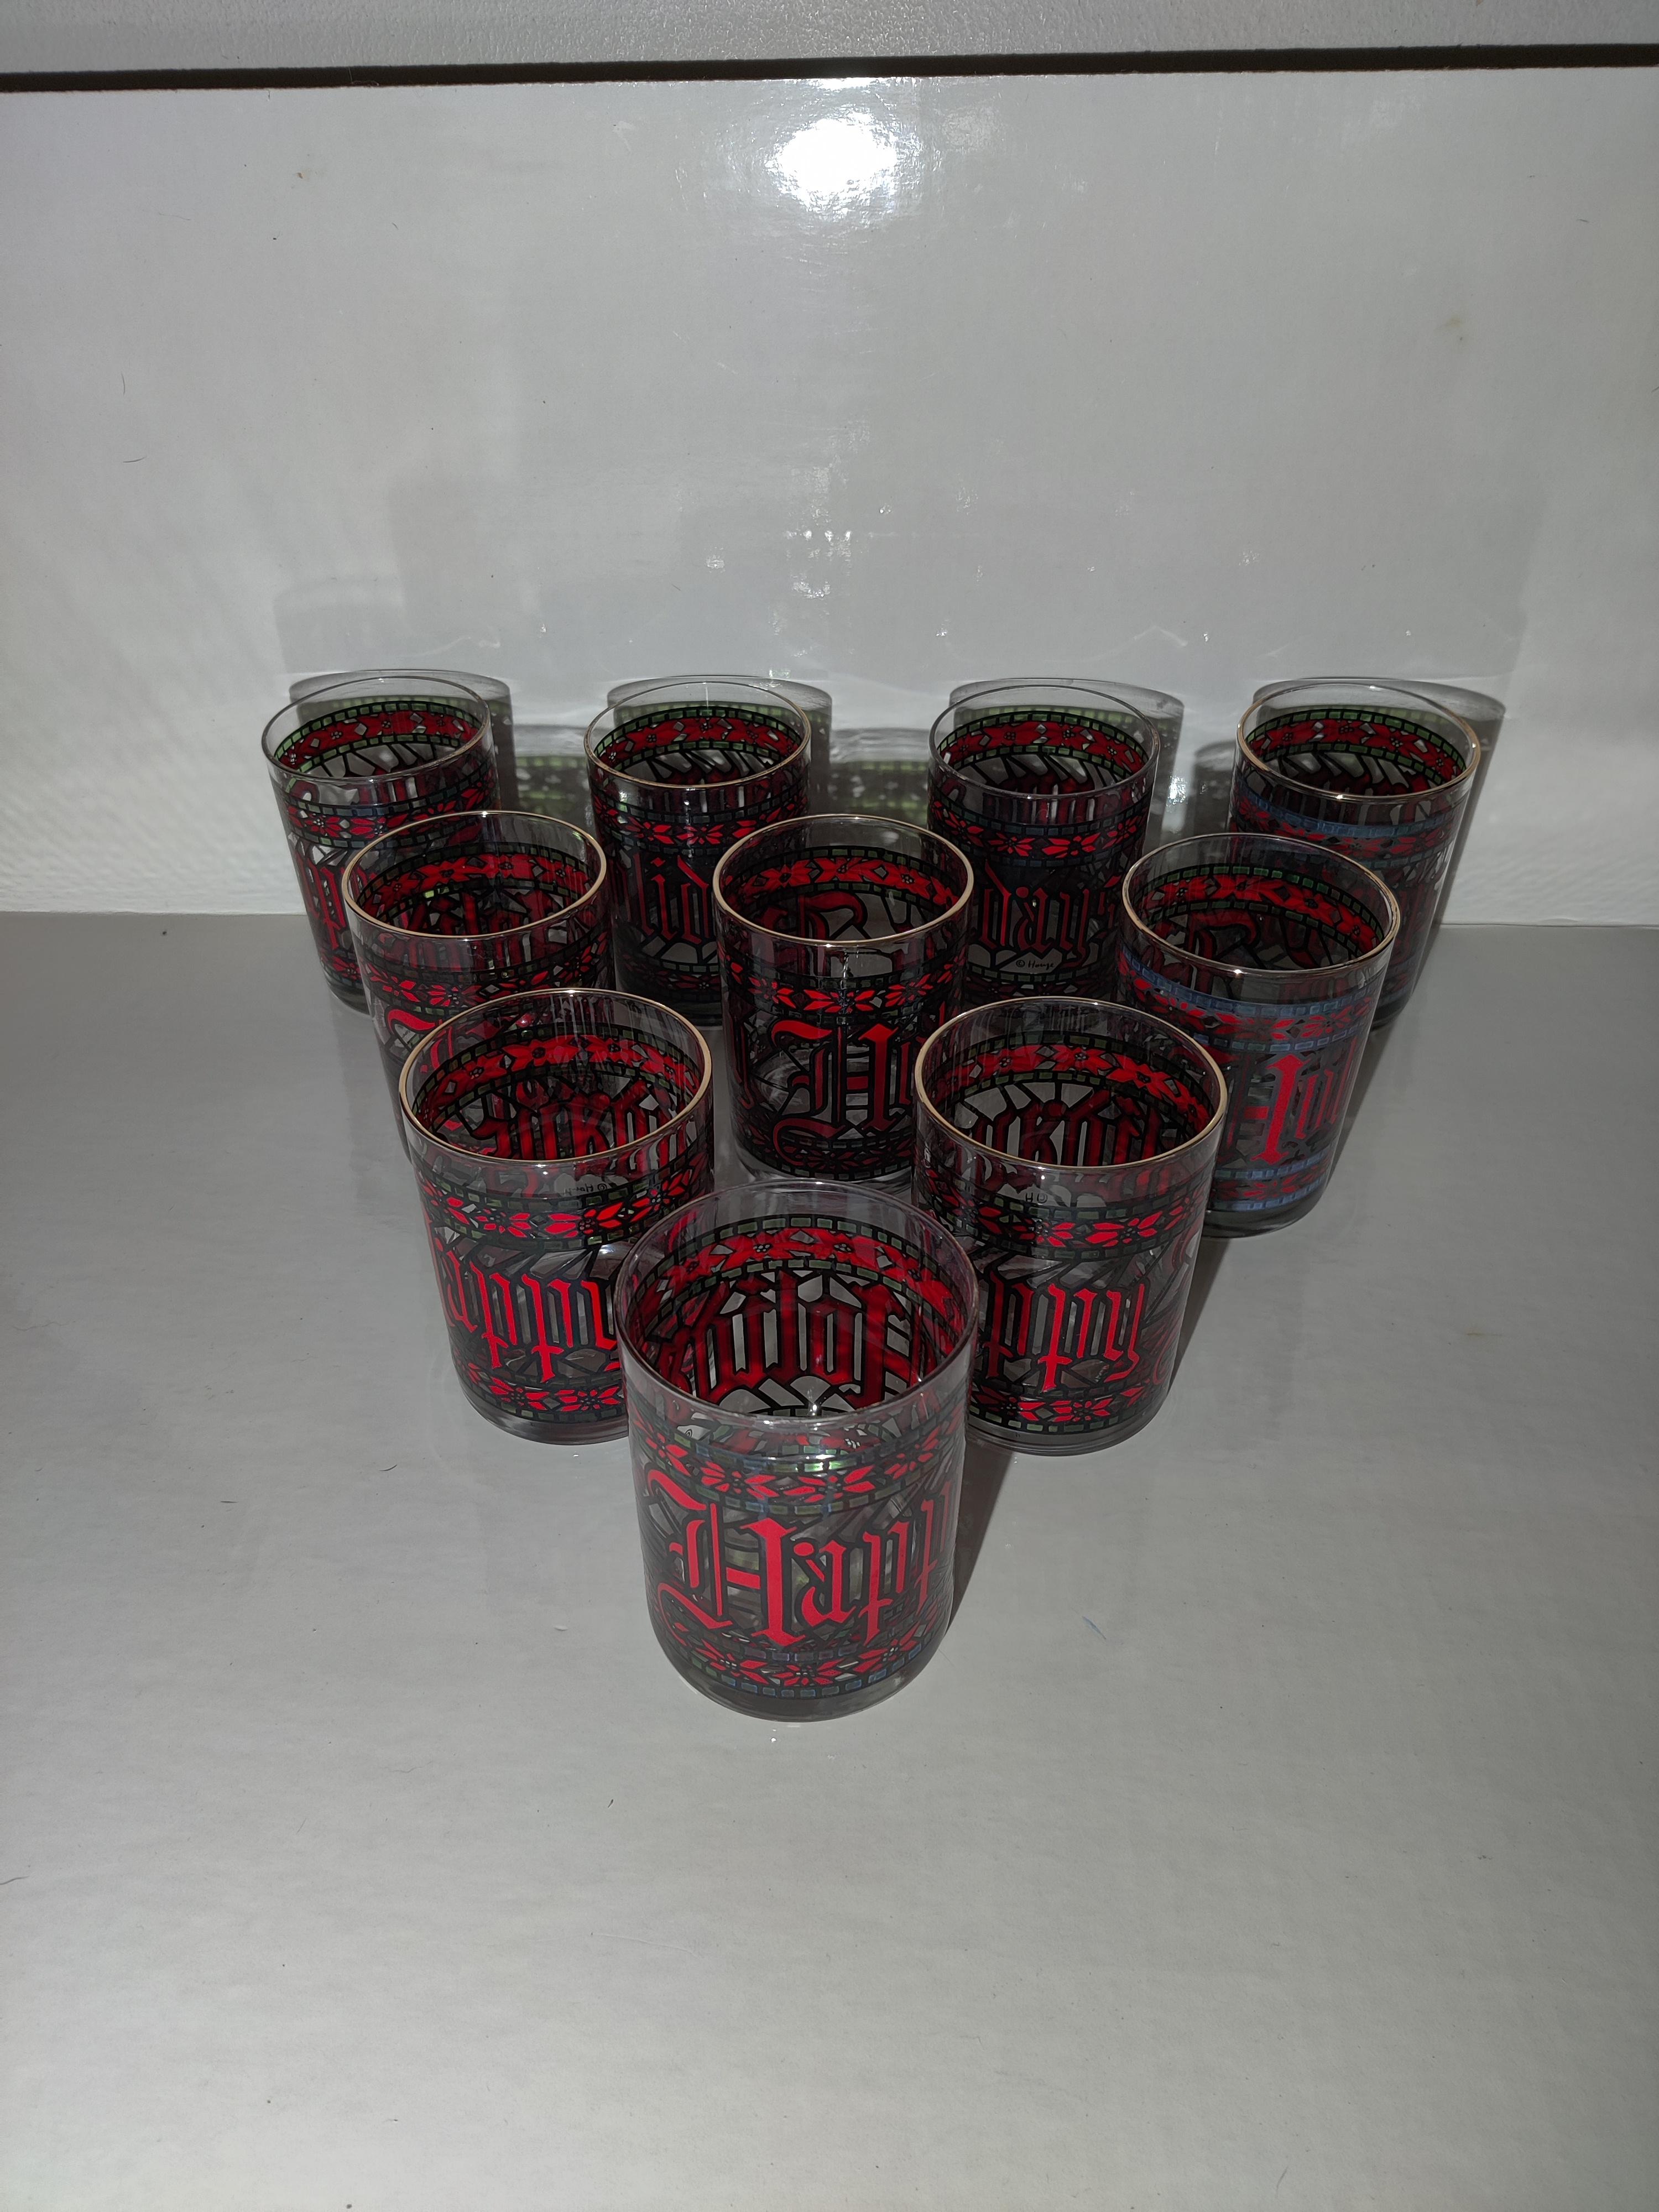 Set of 10 Houze Happy Holiday Stained Glass Design Tumblers
Ready for the holidays.